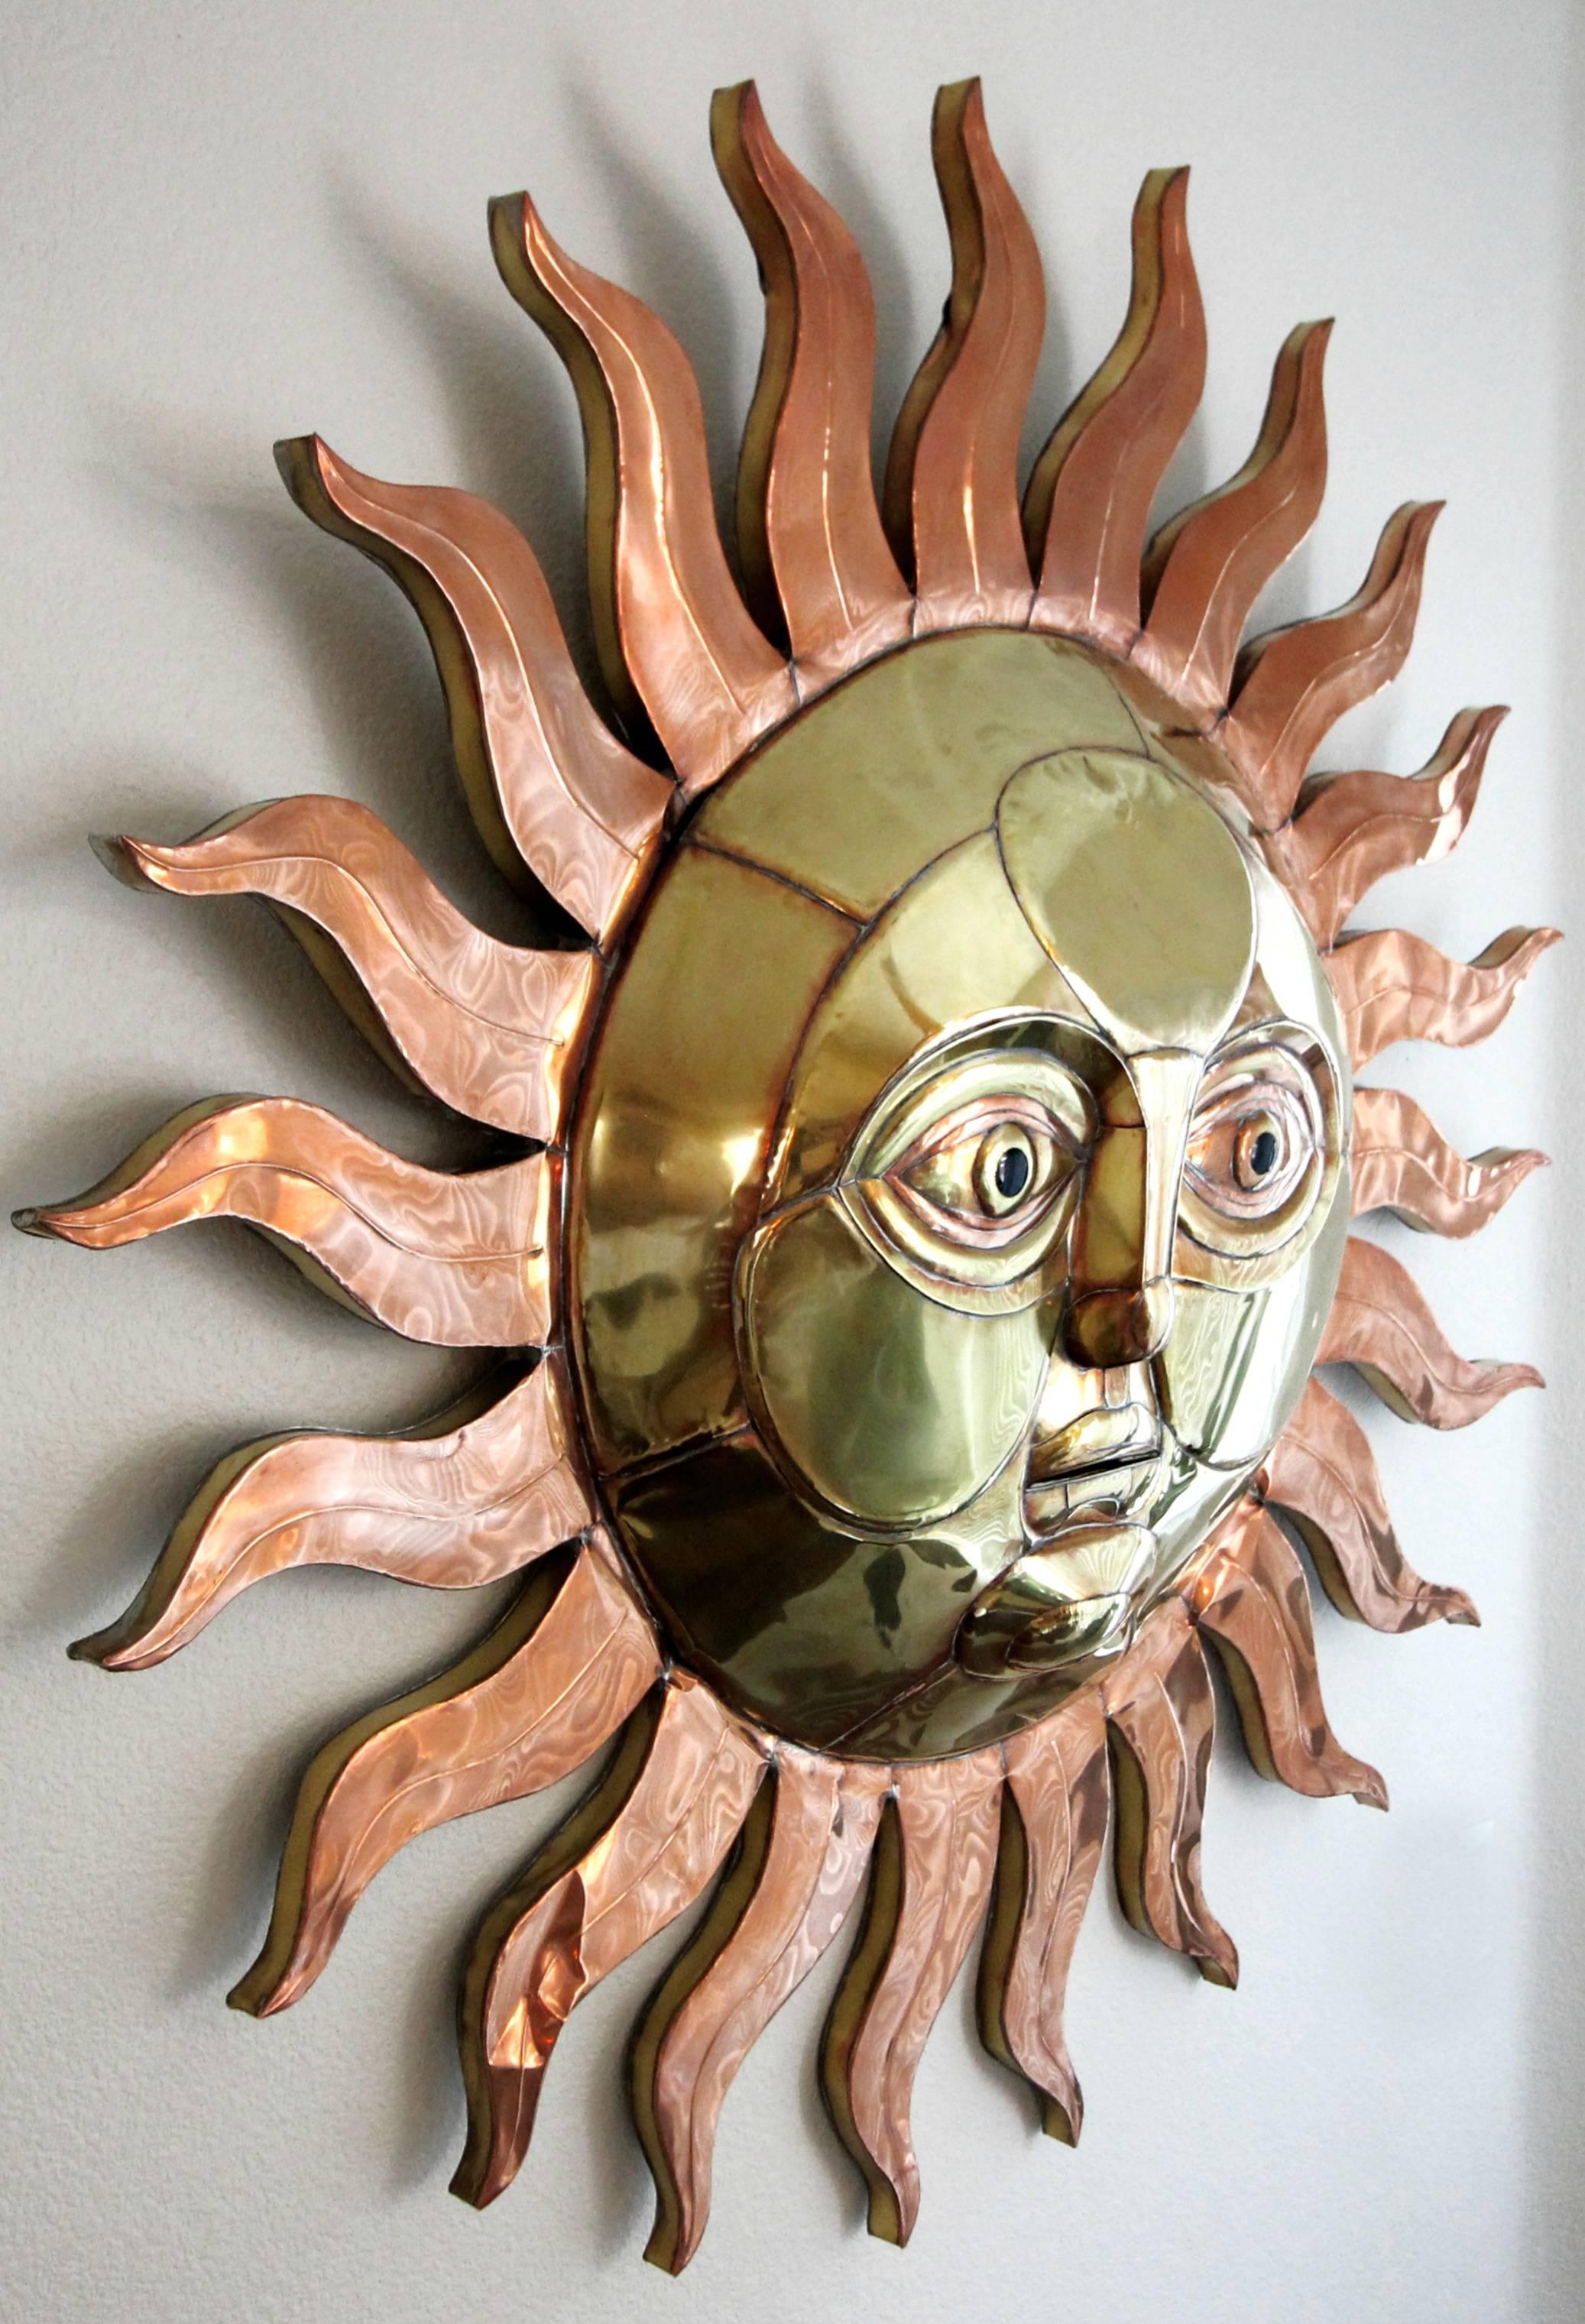 Gorgeous copper and brass Sun wall sculpture by Sergio Bustamante.